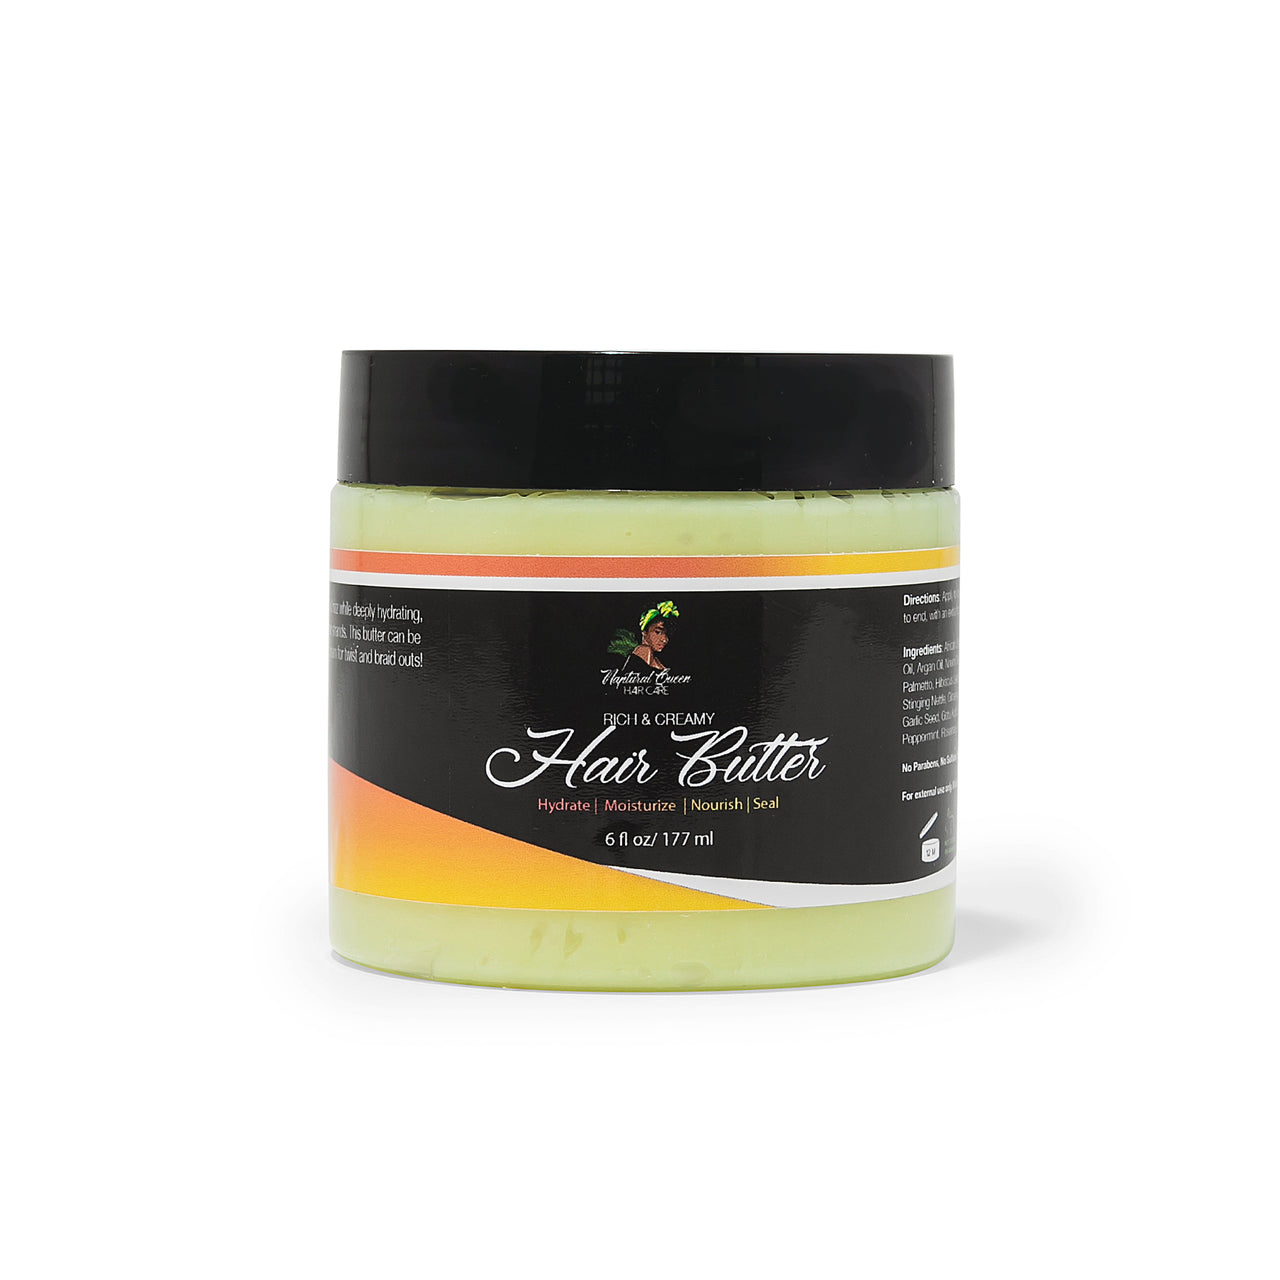 Rich and Creamy Hair Butter